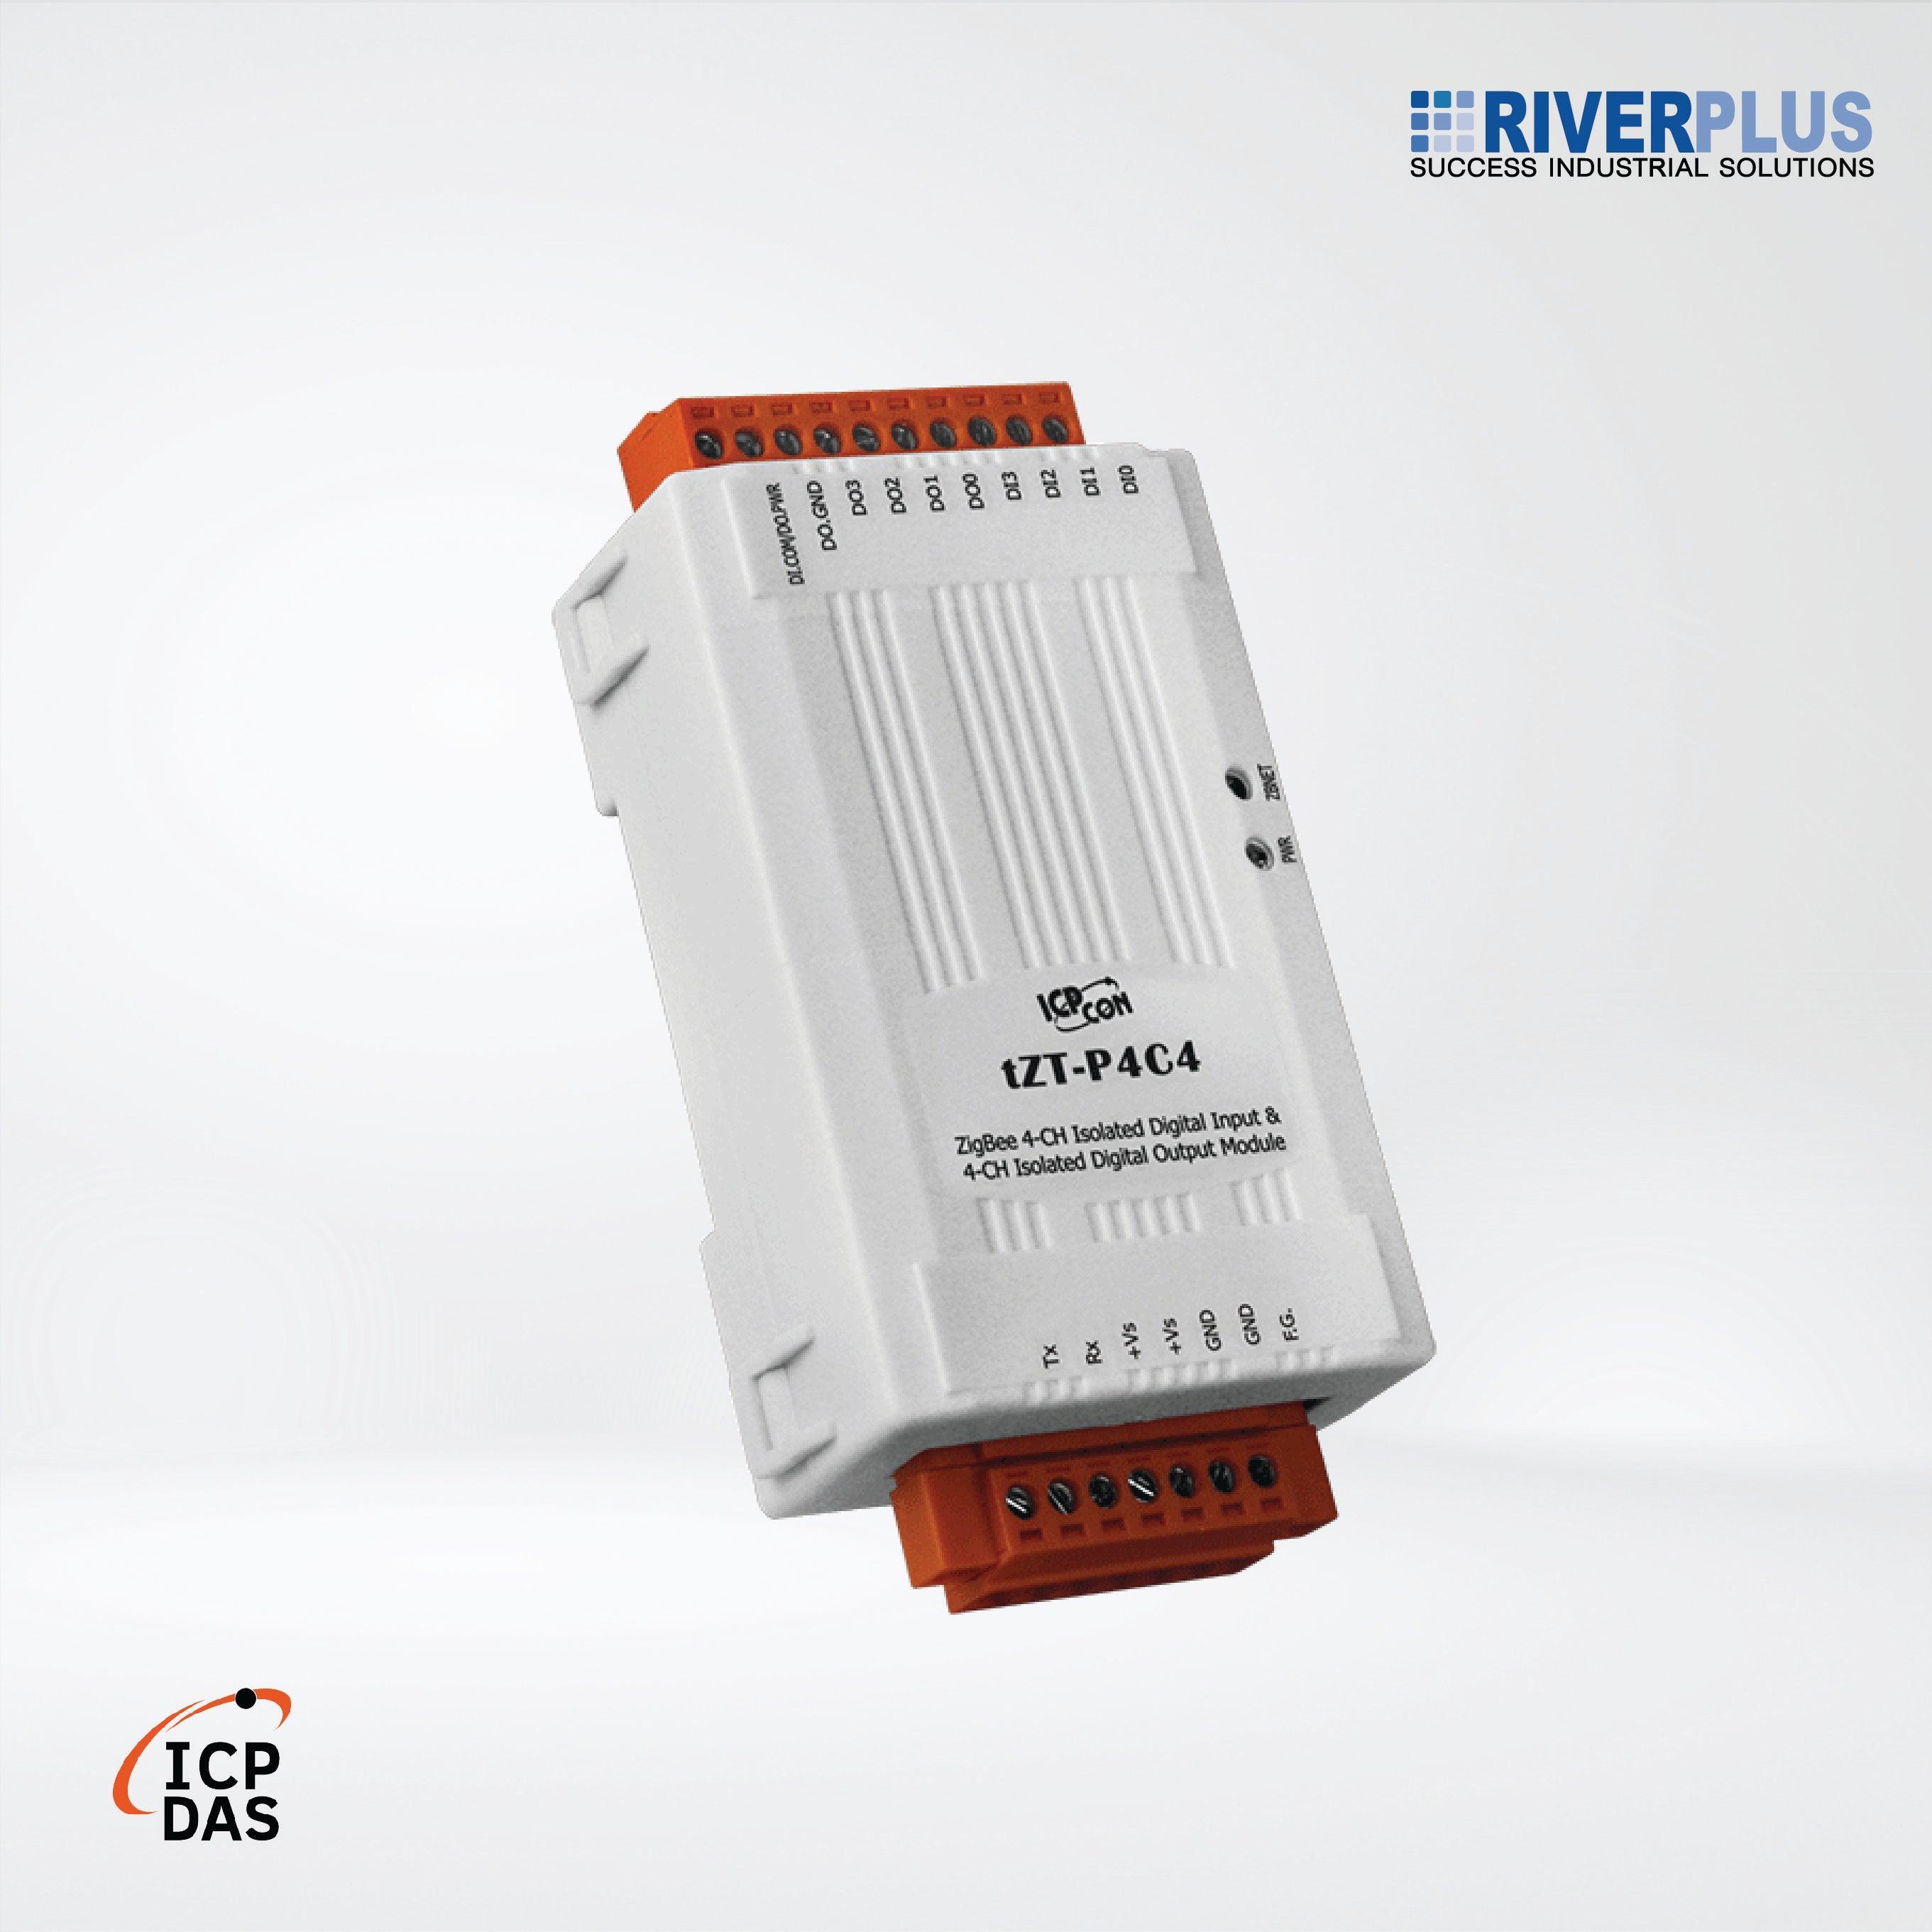 tZT-P4C4 Tiny ZigBee Wireless 4-ch Isolated DI and 4-ch Isolated DO Module - Riverplus